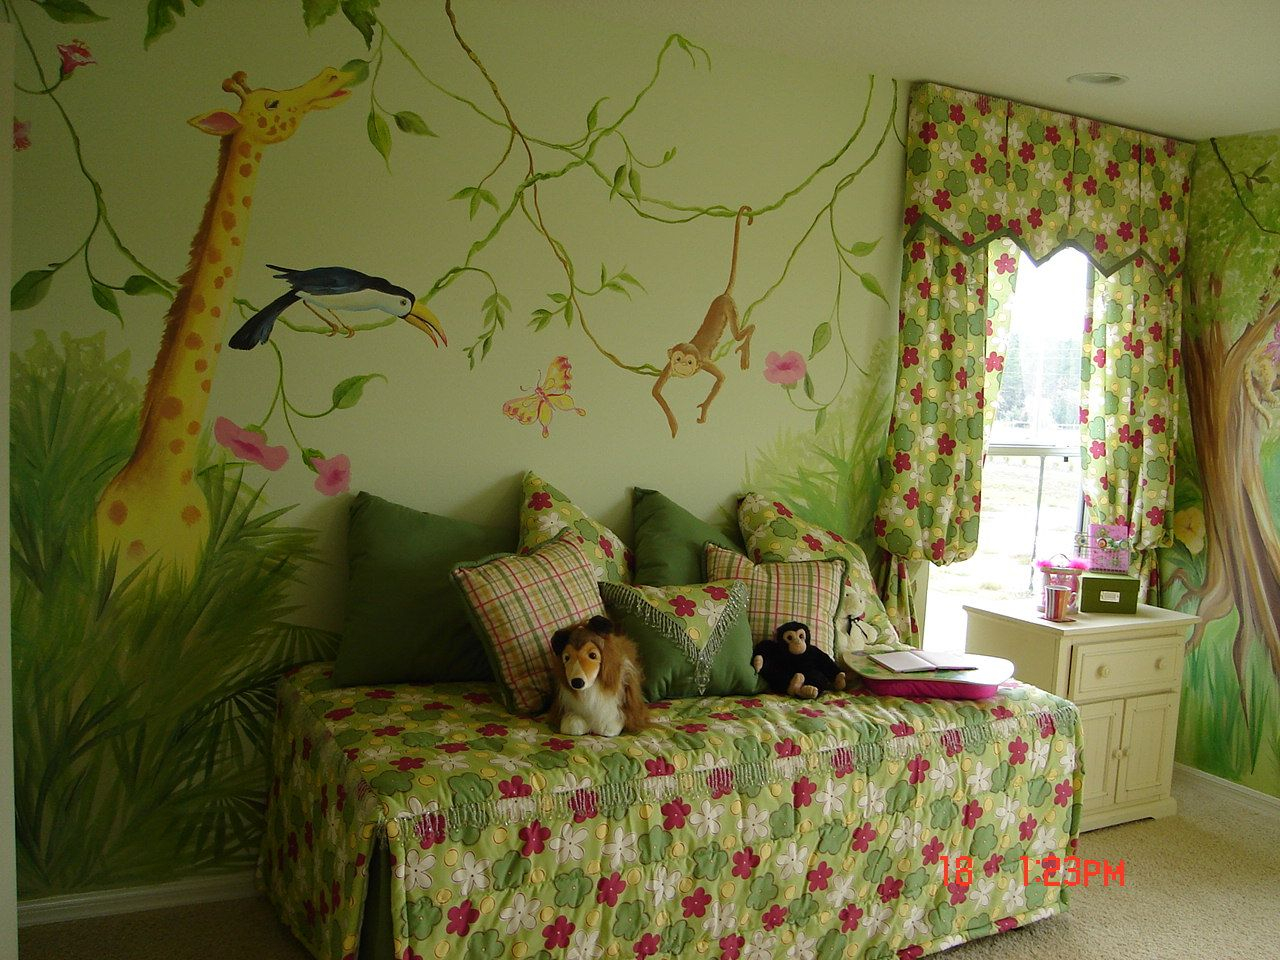 Unisex Childrens Wallpaper 66) Group Wallpapers - Jungle Bedroom Ideas For Walls - HD Wallpaper 